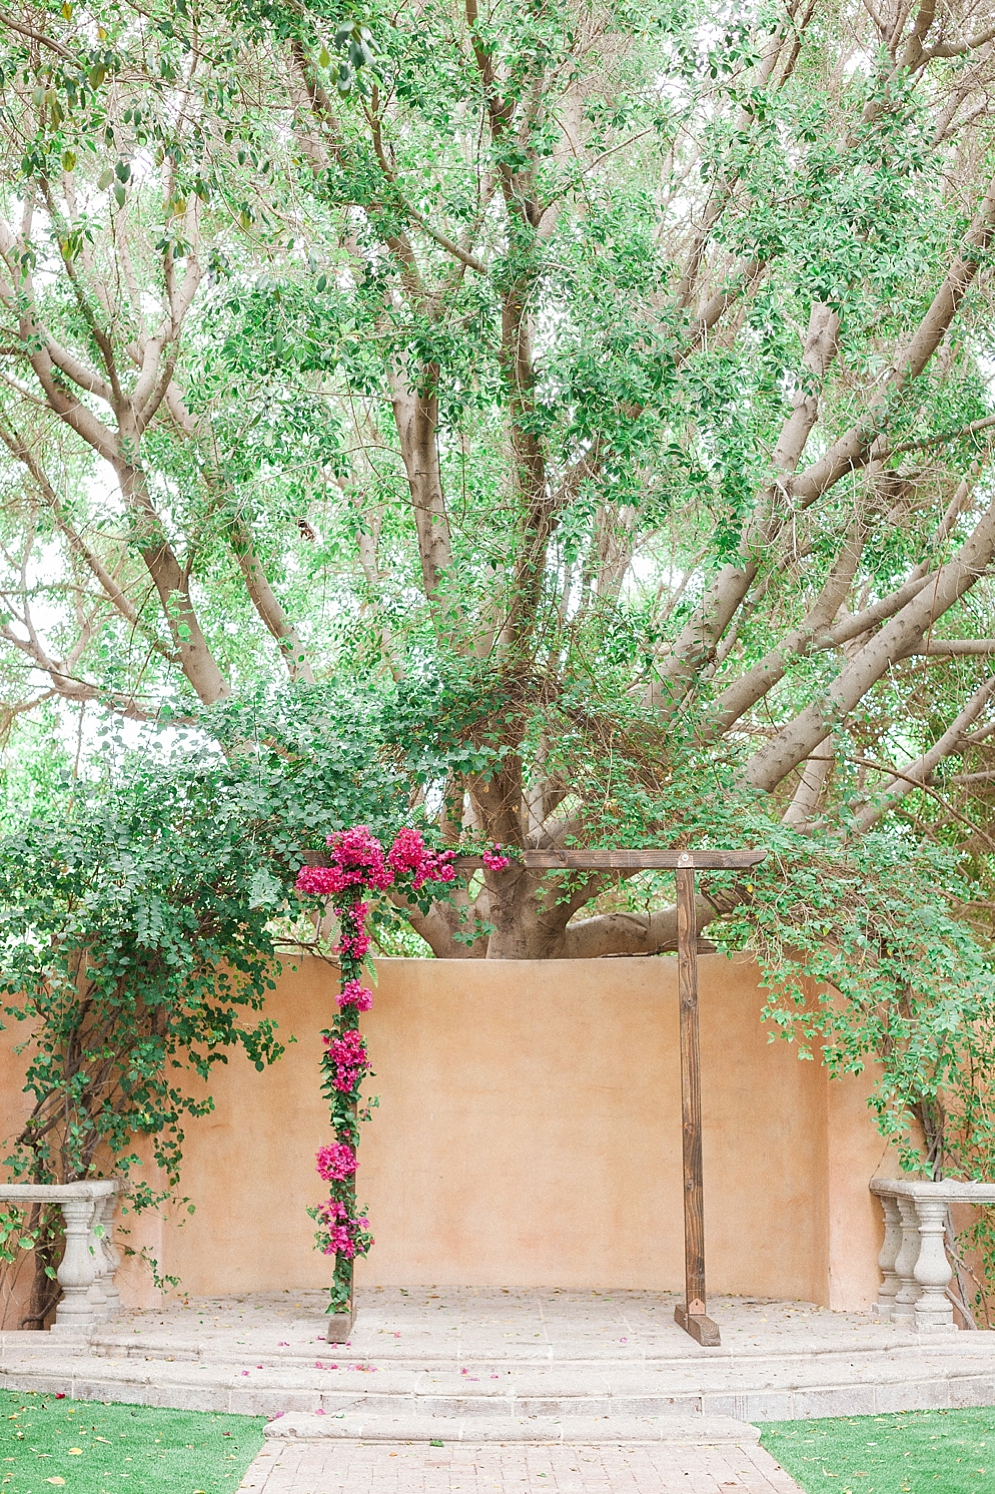 Wedding Wood Decorations to Incorporate | St. Louis Wedding Photographer | Royal Palms Resort and Spa Wedding | ceremony arch with pink flowers